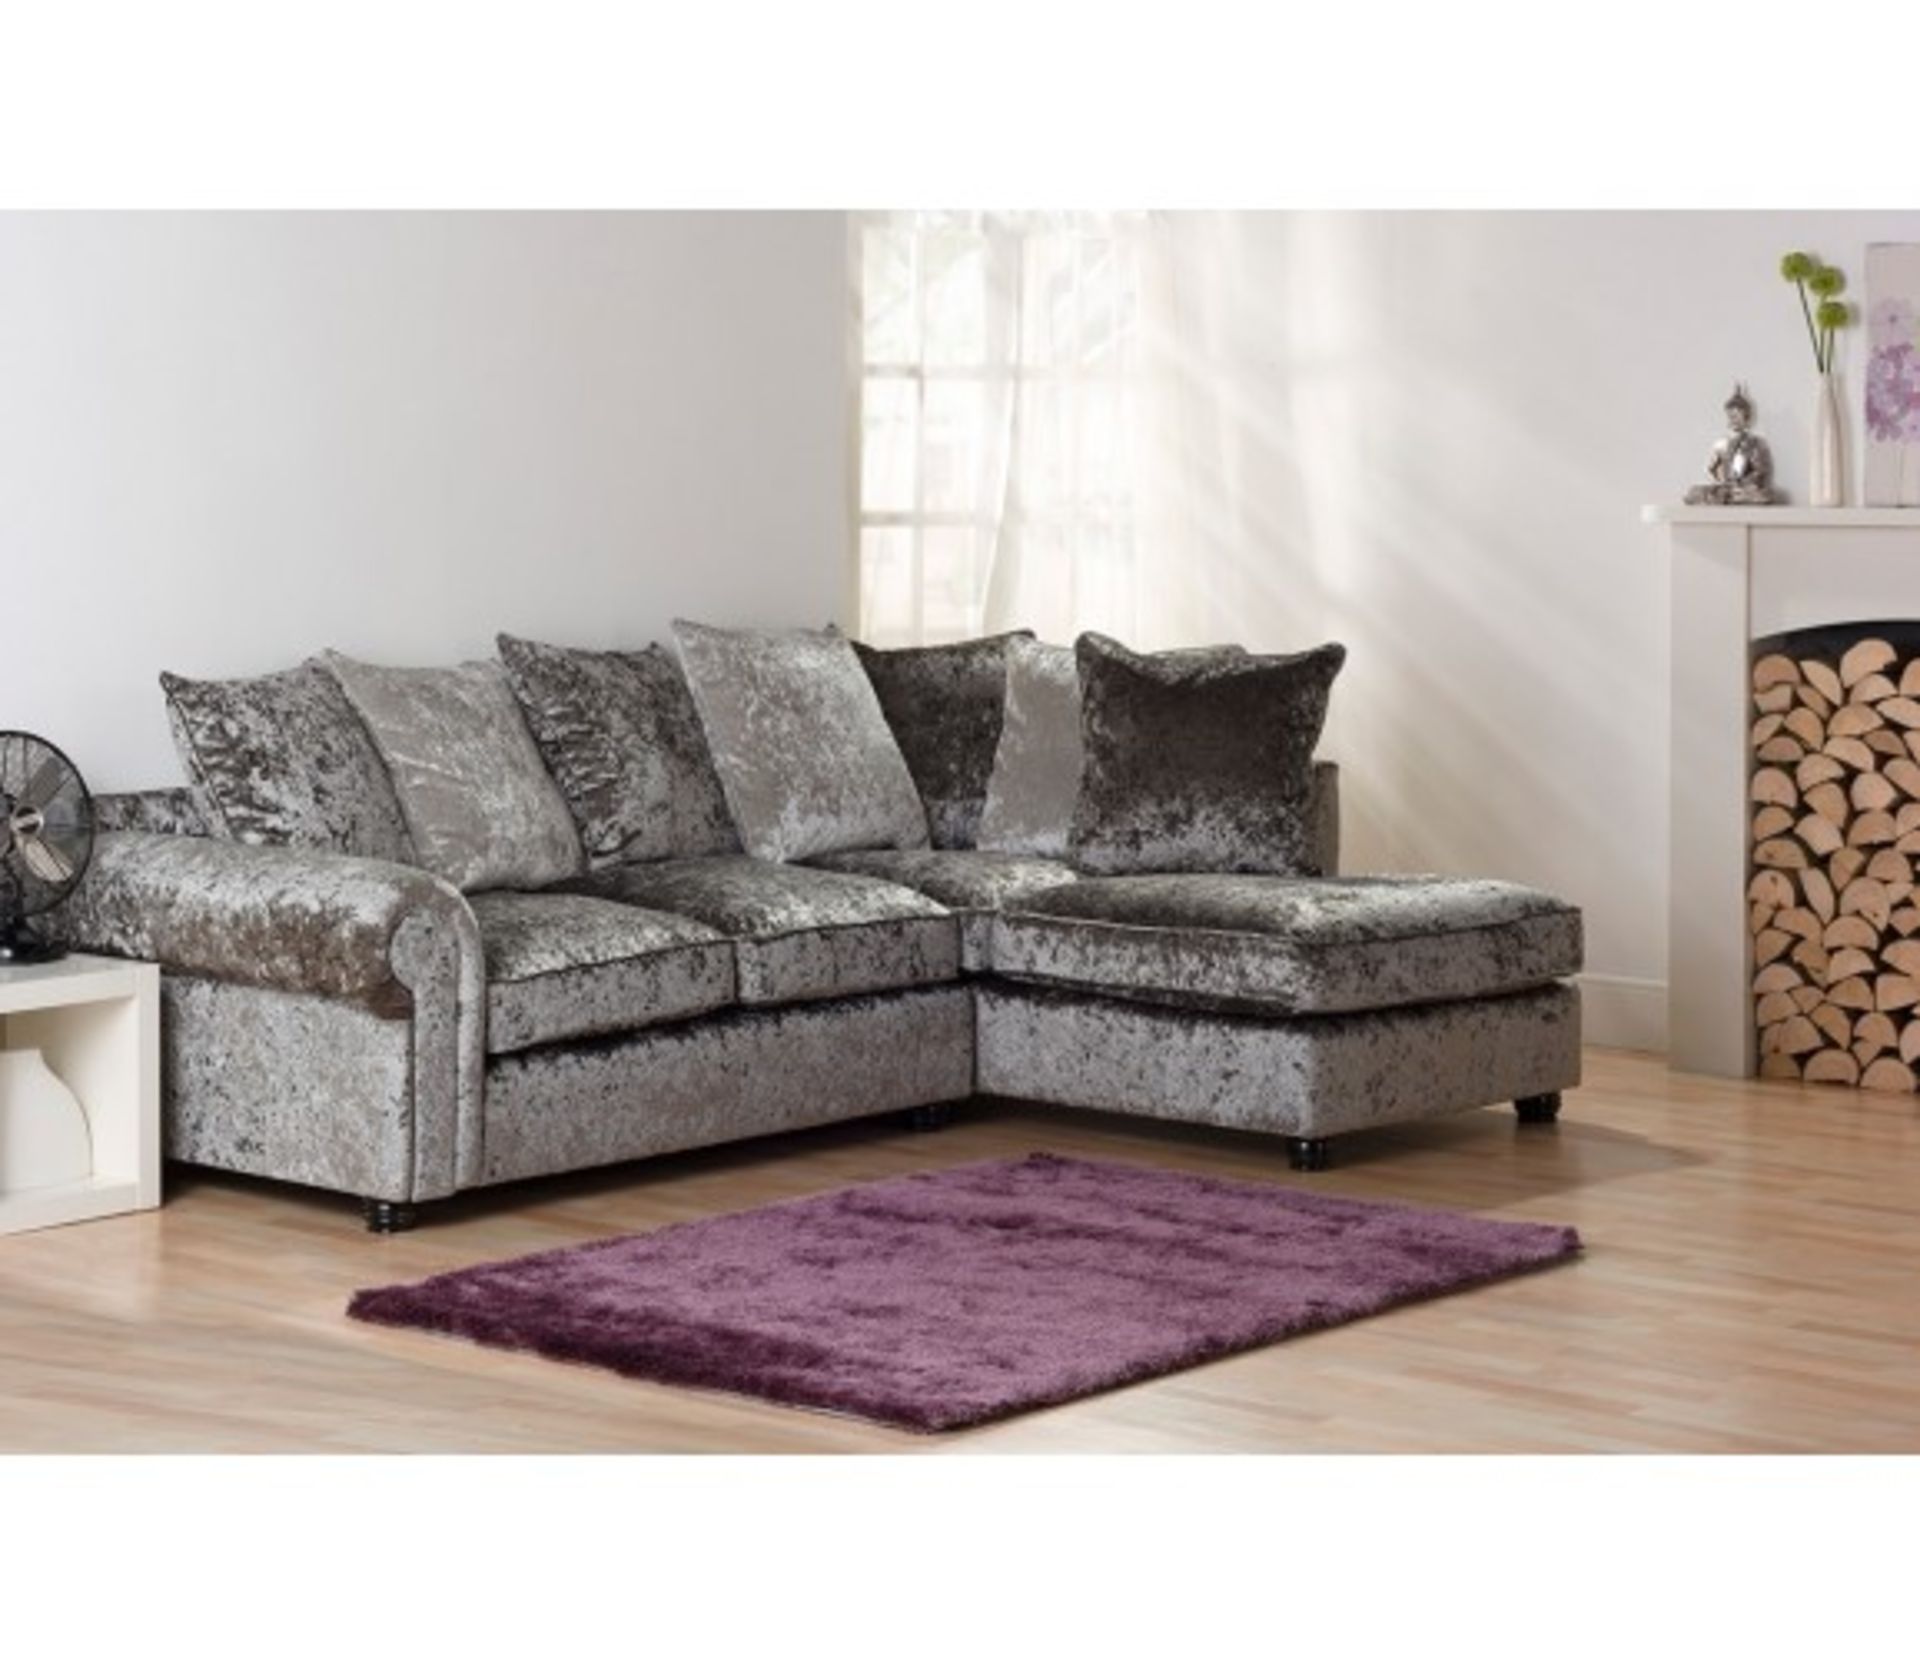 Scarpa deluxe corner sofa in sterling silver shimmer plus matching footstool left arm facing